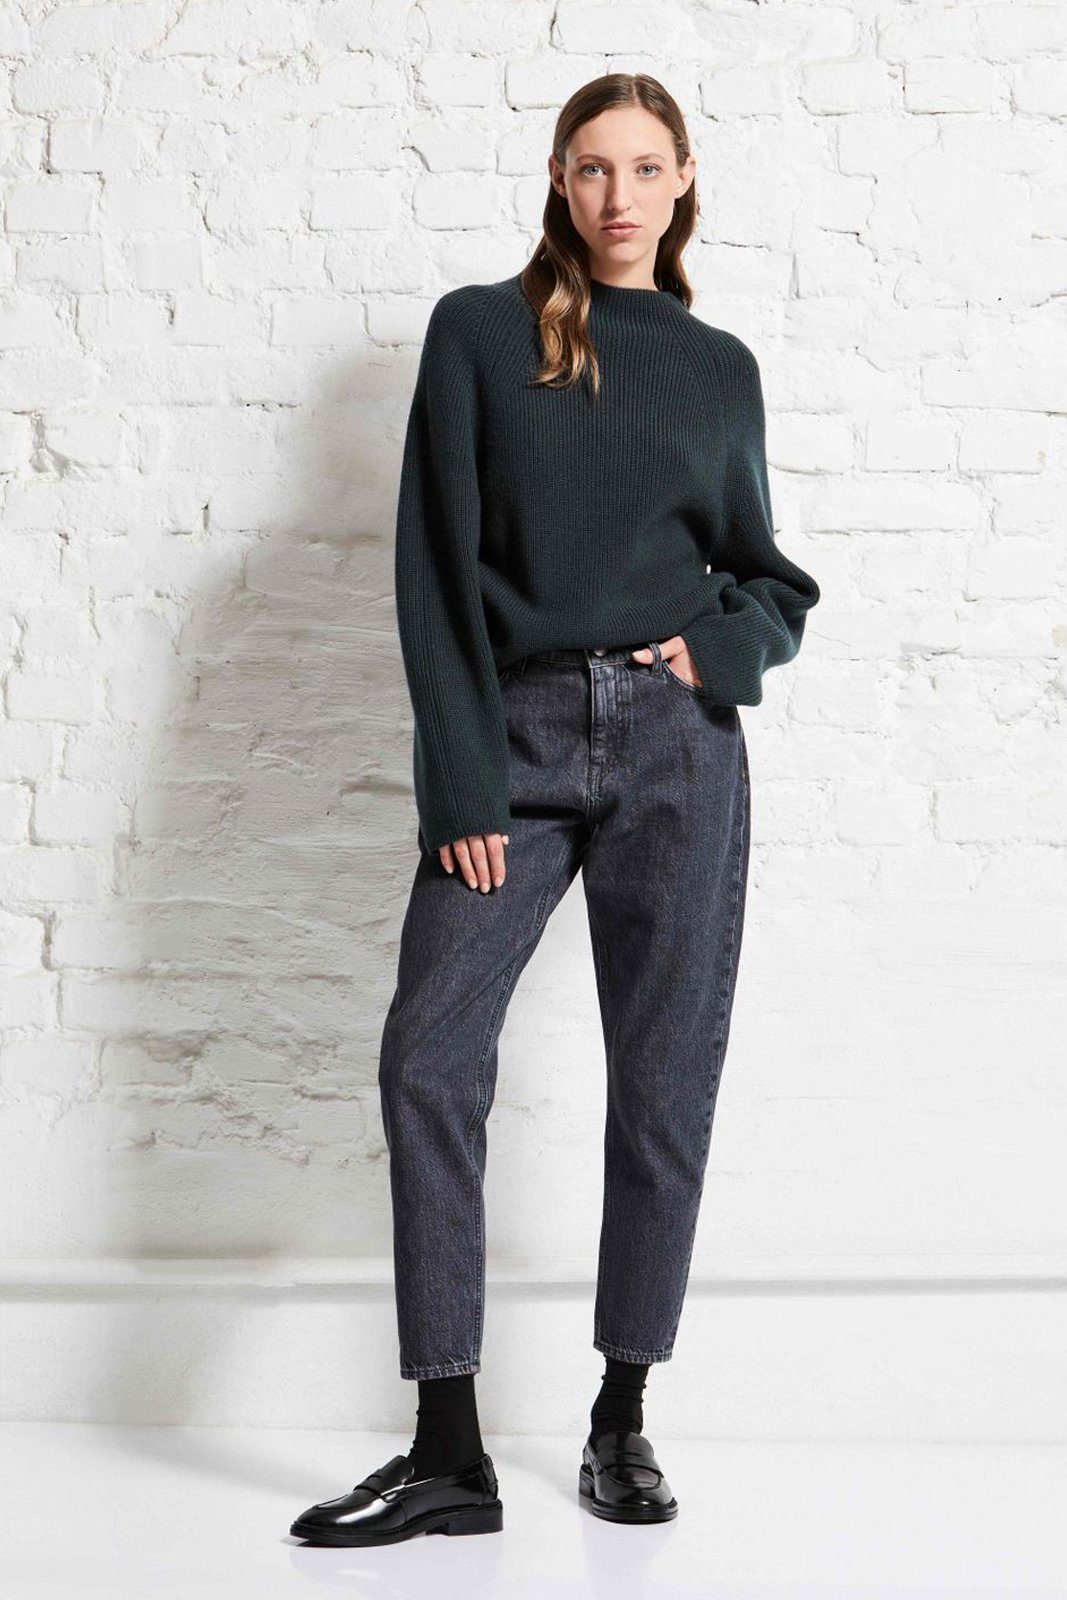 wunderwerk Mom-Jeans Collien carrot cropped eco bleached black 250